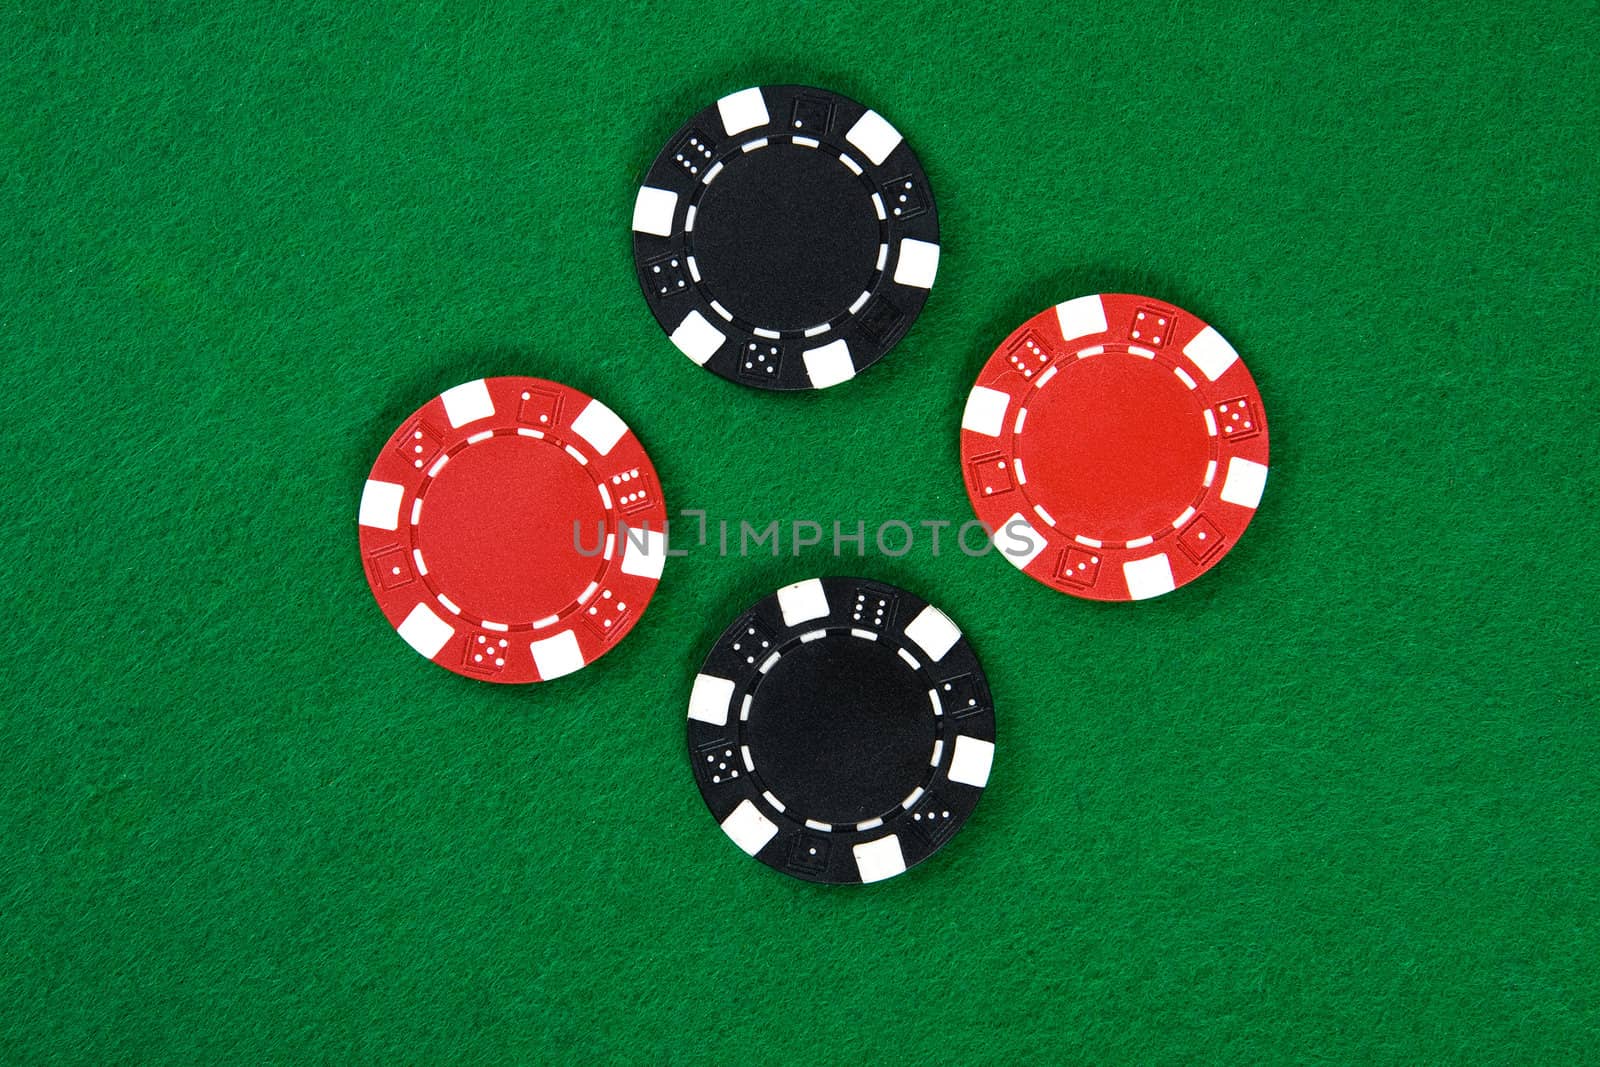 Two kinds of poker chips in the middle of green poker table. Top view.